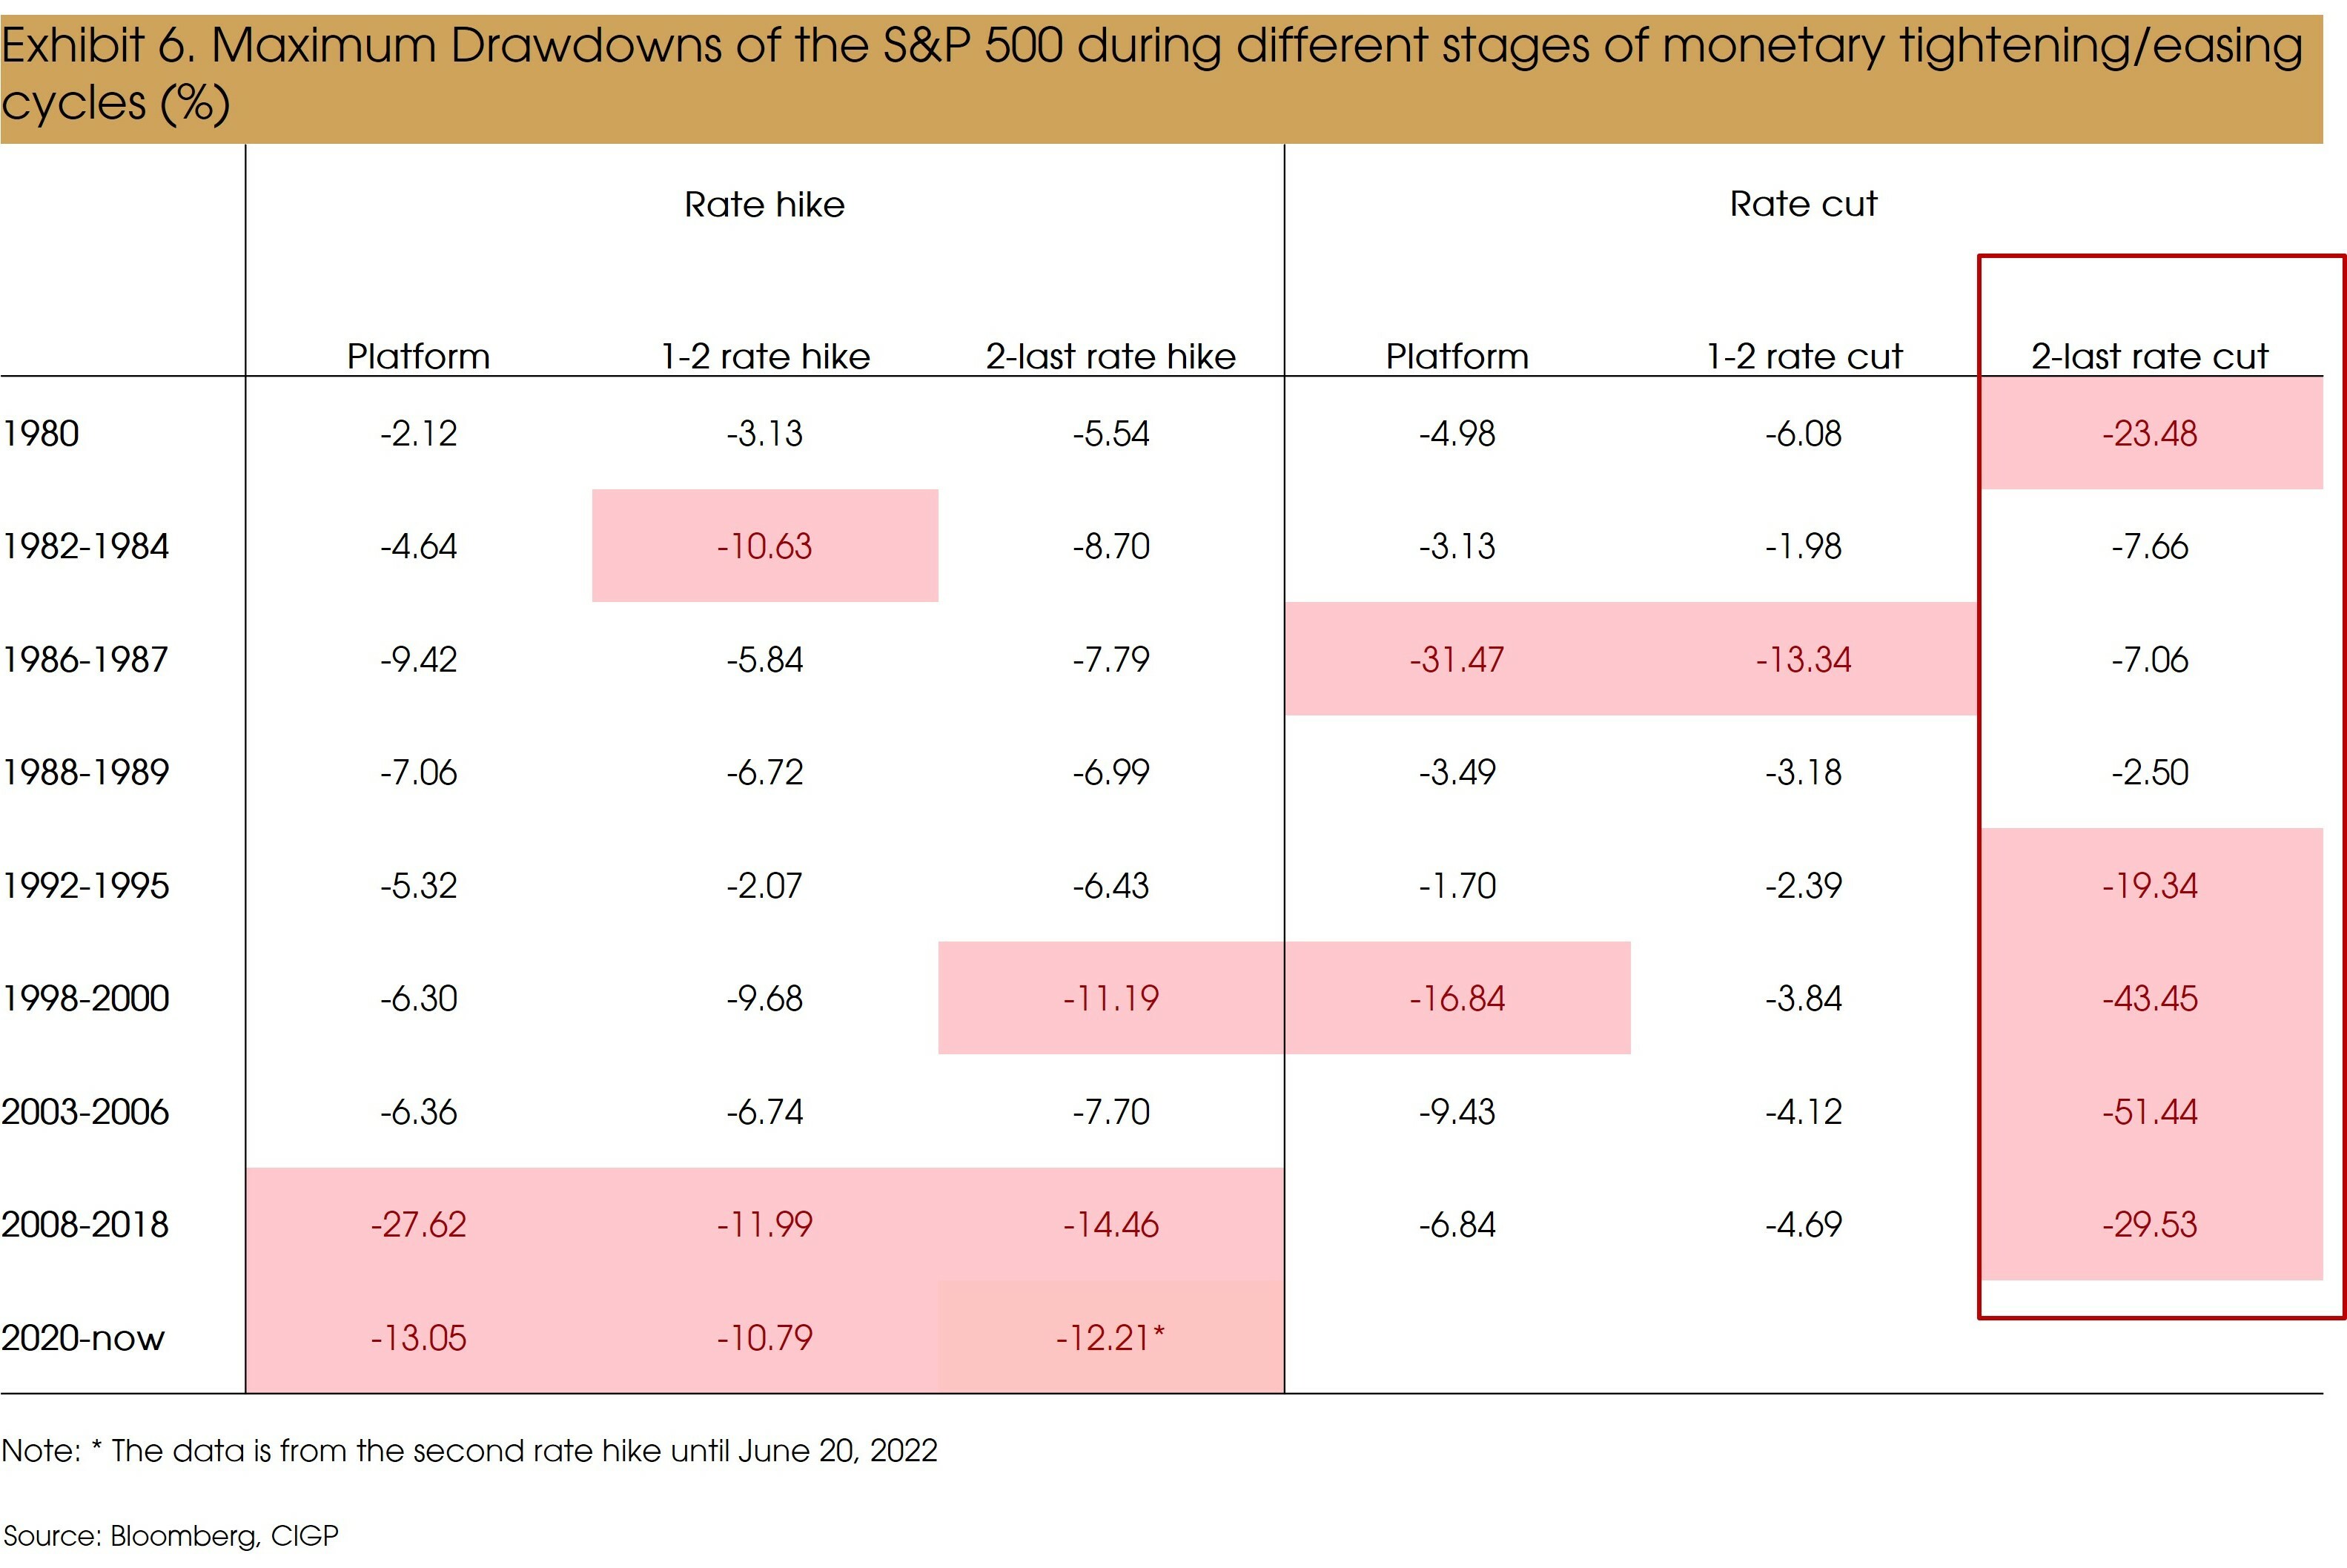 Exhibit 6 Maximum Drawdowns of the SP500 During Different Stages of Monetary Tightening or Easig Cycles